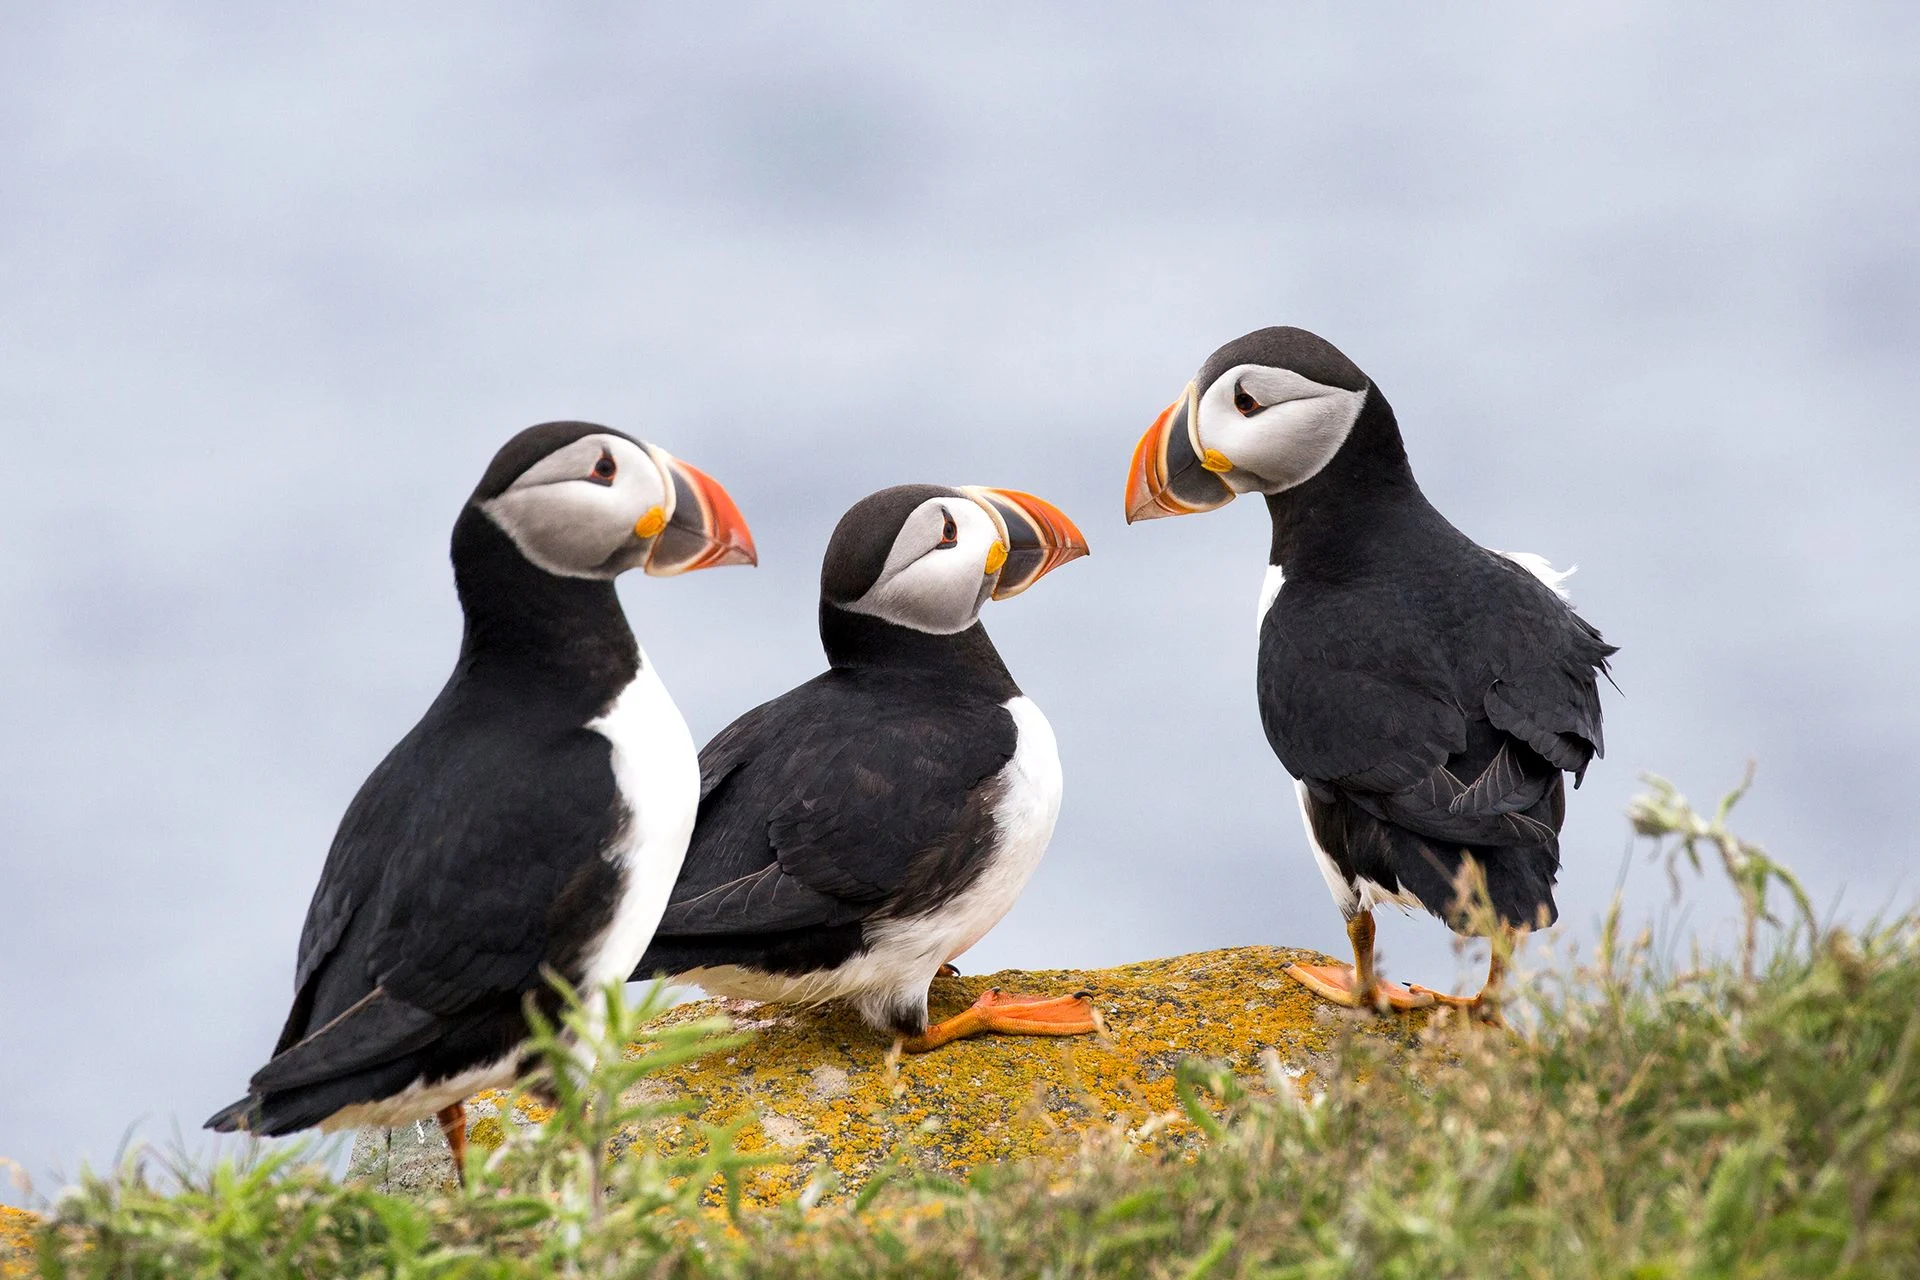 Puffins are a common sight for bird watchers in Newfoundland.